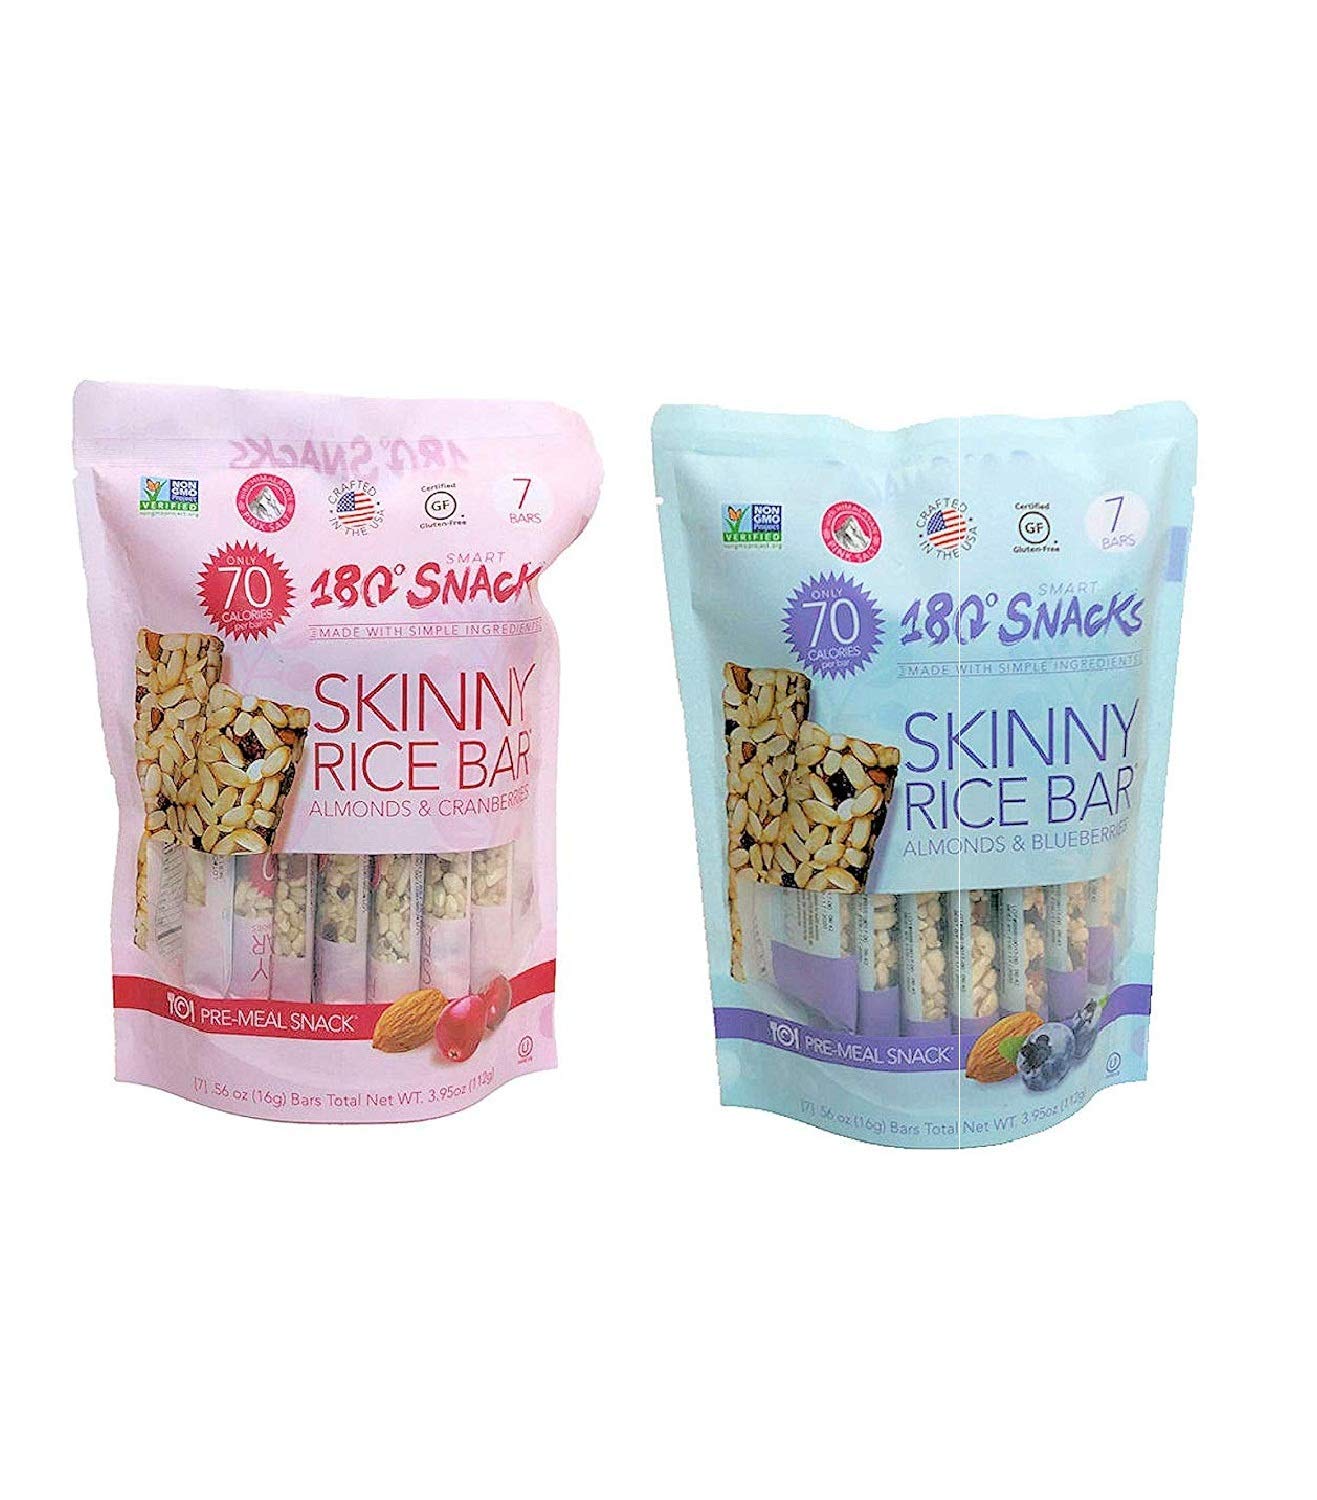 180 Snacks Pre-Meal Snack Skinny Rice Bar with Himalayan Salt 1 Pack,  3.22oz (Blueberry